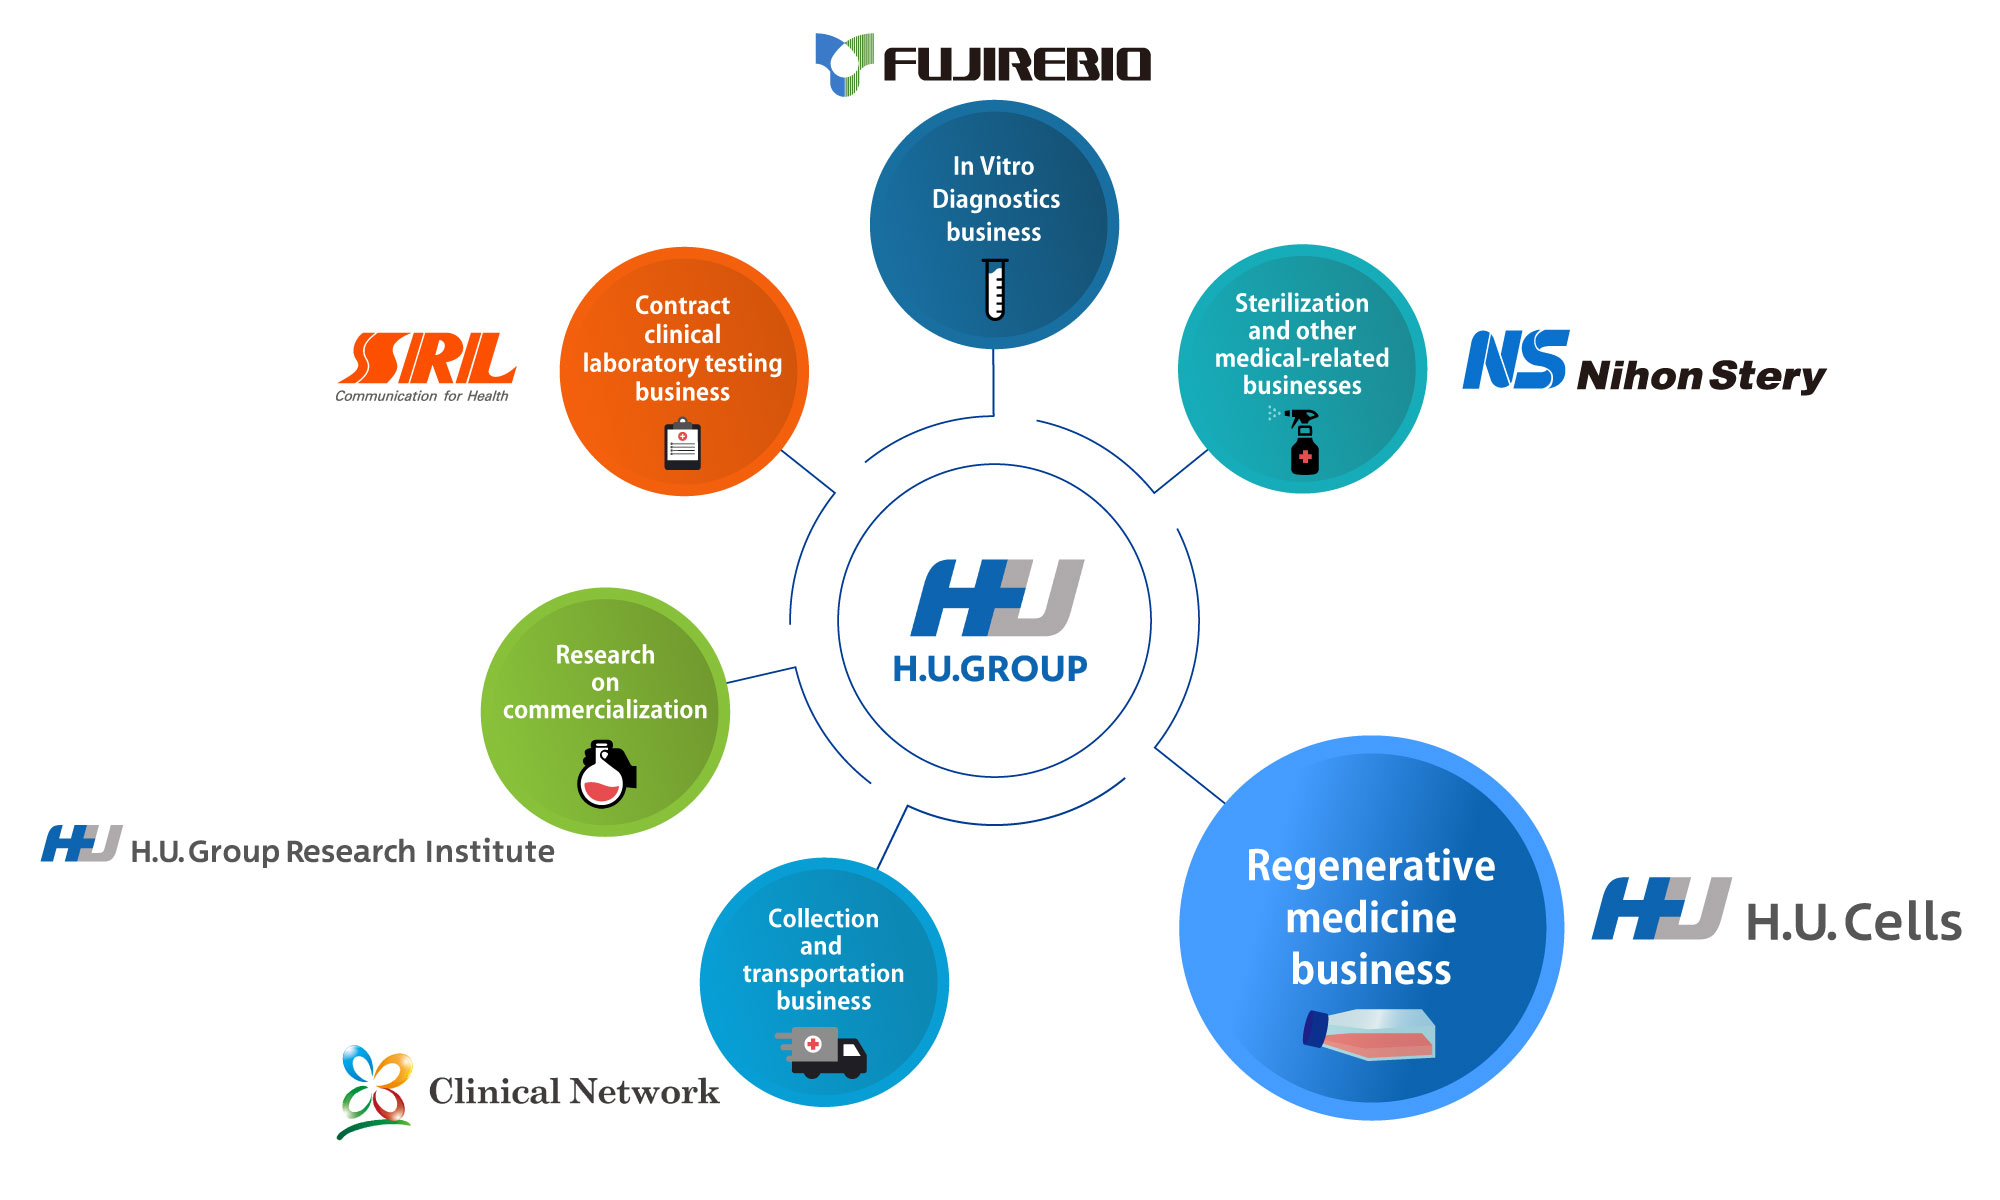 About H.U. Group's regenerative medicine-related services：H.U. Cells, Inc.=Regenerative medicine business, SRL, Inc.= Contract clinical laboratory testing business, Fujirebio, Inc.= In Vitro Diagnostics business, Nihon Stery, Inc.= Sterilization and other medical-related businesses, H.U. Group Research Institute G.K.= Research on commercialization, Clinical Network G.K.= Collection and transportation business